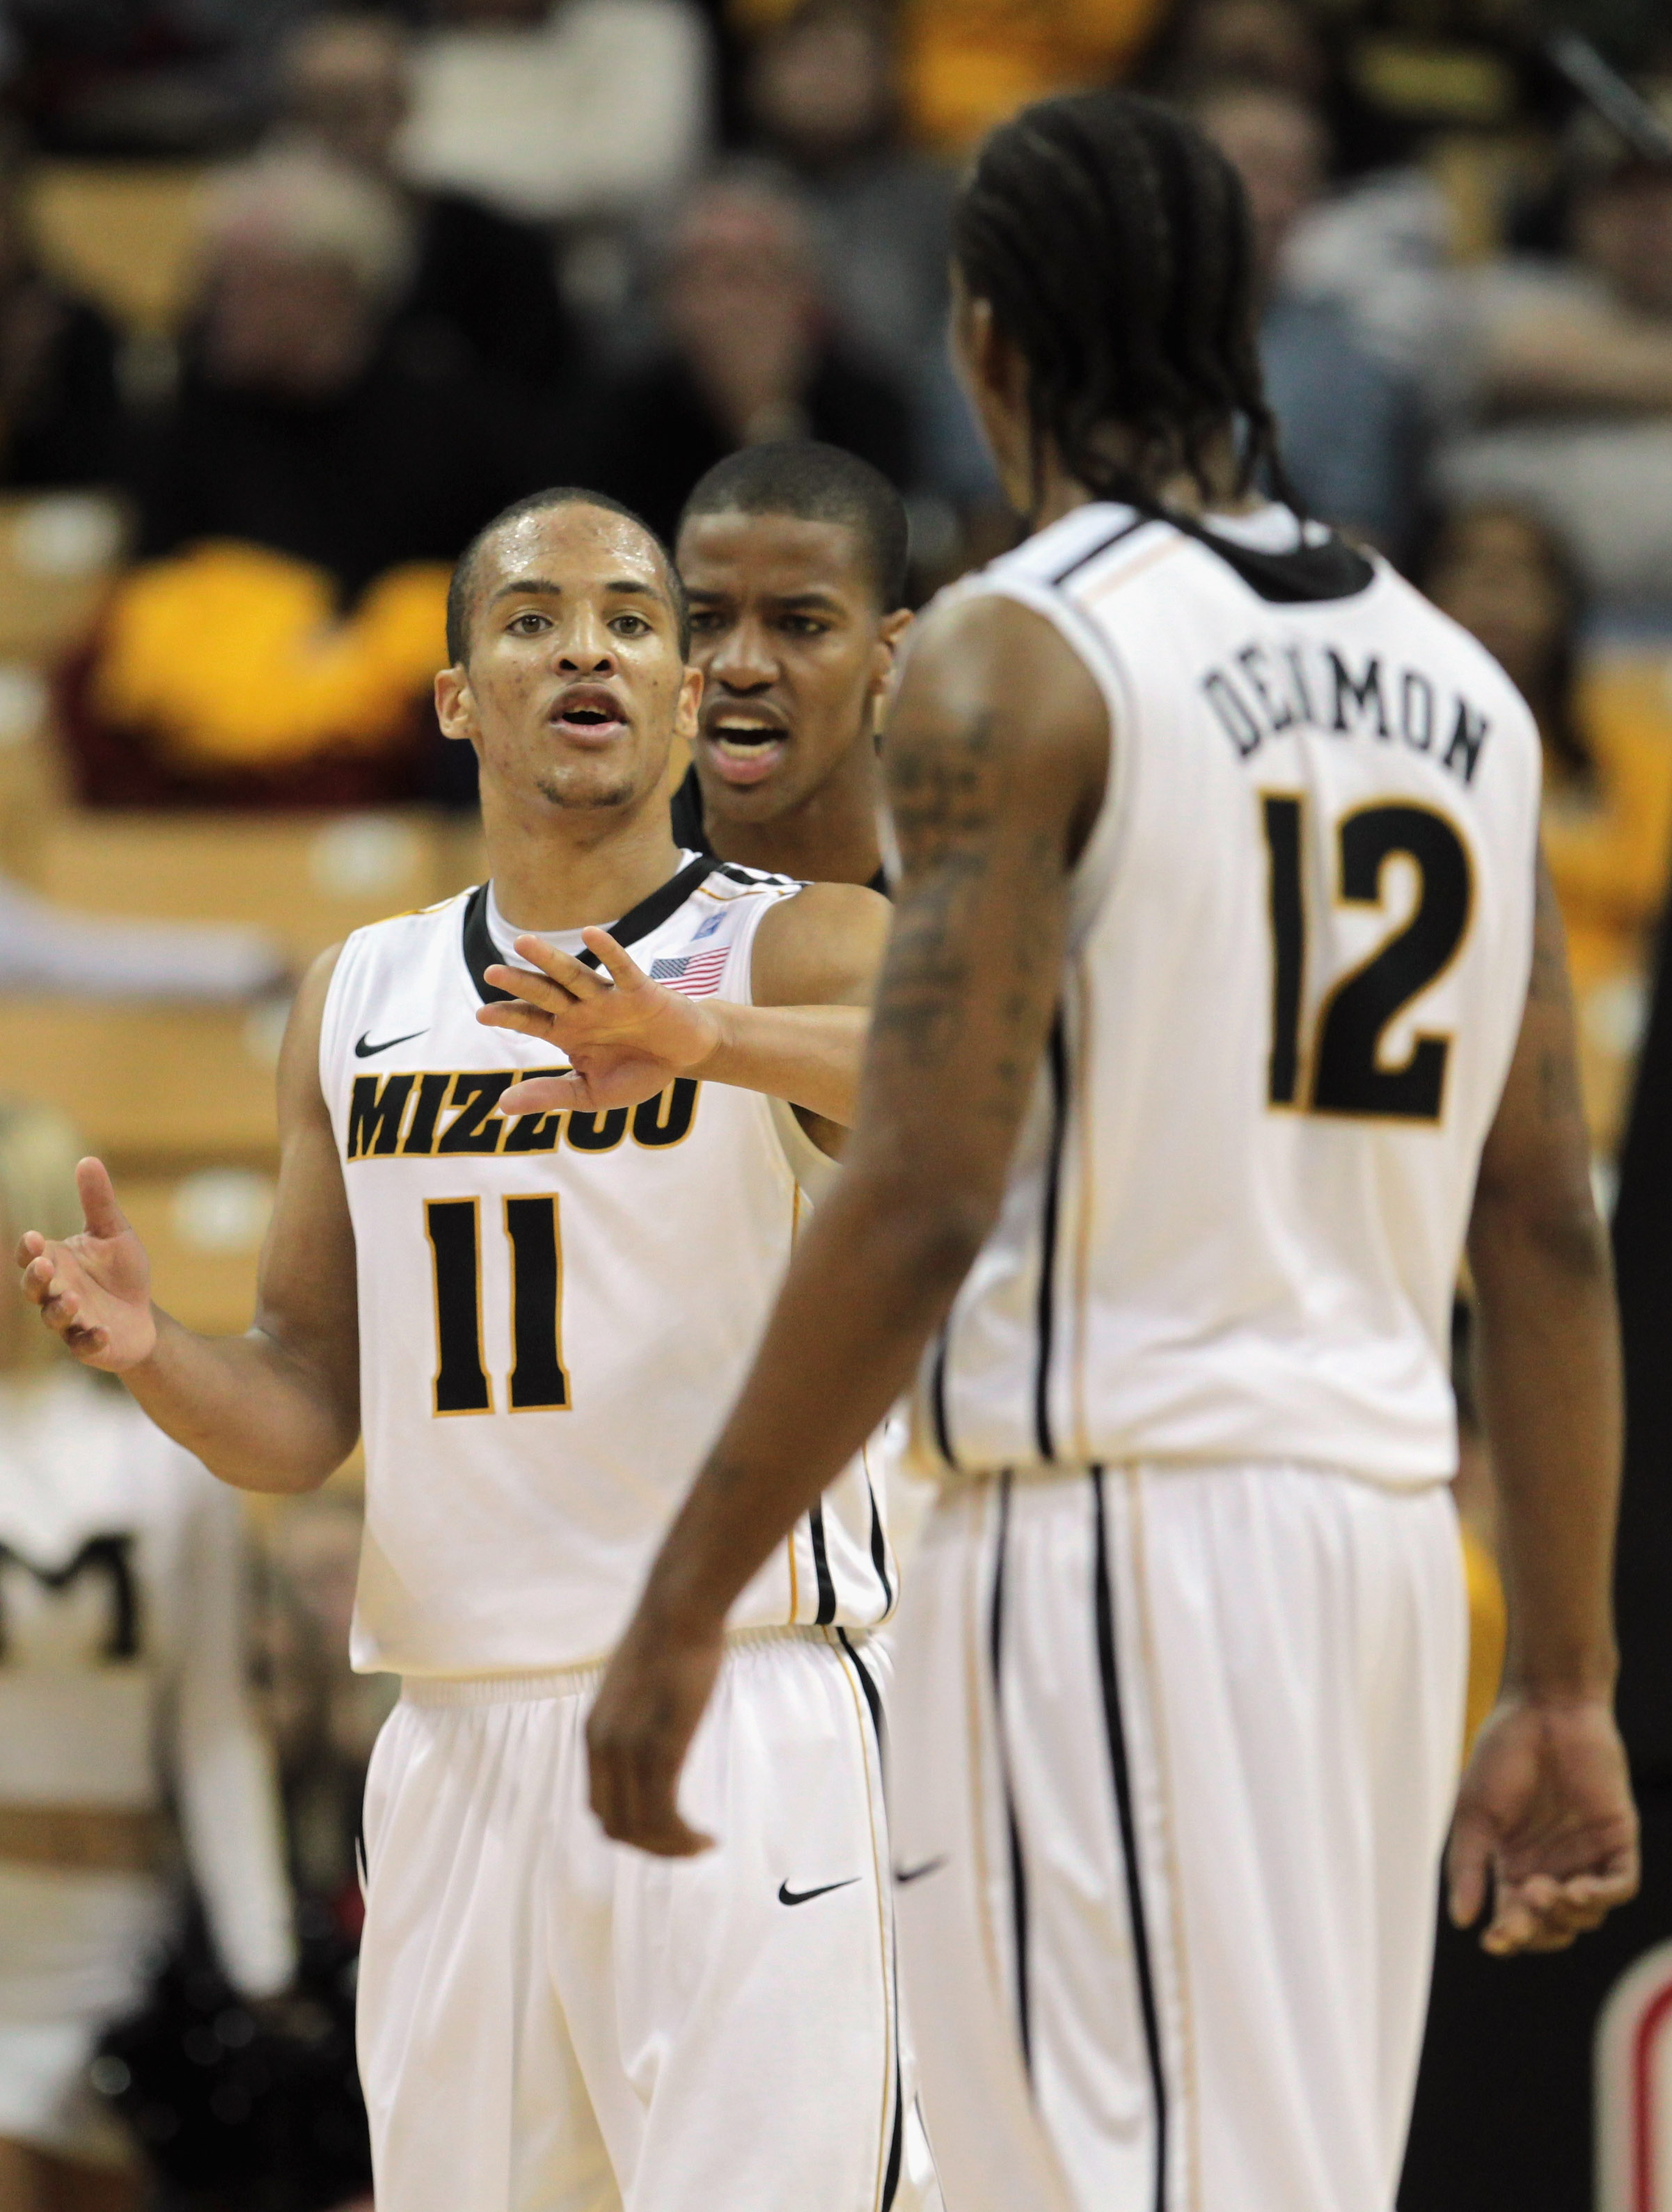 COLUMBIA, MO - DECEMBER 08:  Michael Dixon #11 #10 of the Missouri Tigers congratulates Marcus Denmon #12 after scoring during the game against of the Vanderbilt Commodores on December 8, 2010 at Mizzou Arena in Columbia, Missouri.  (Photo by Jamie Squire